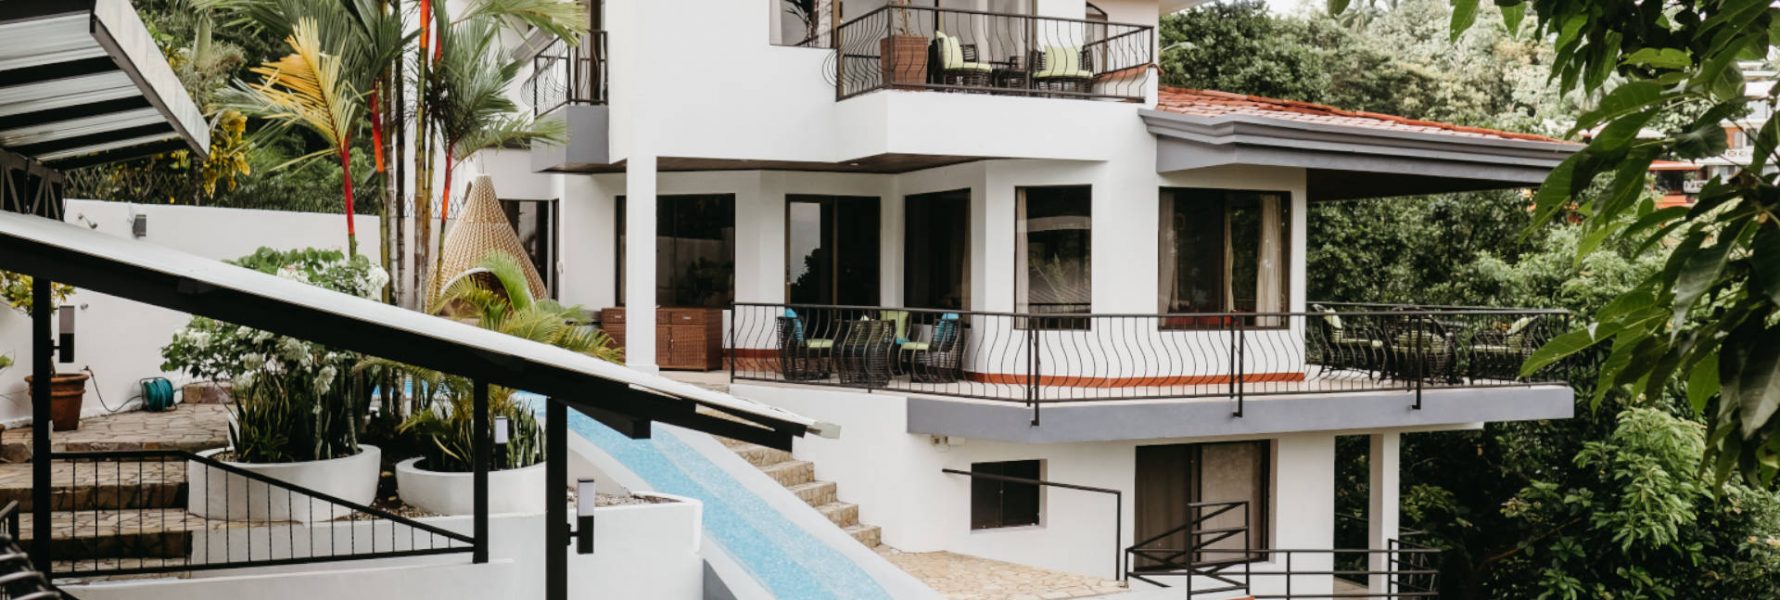 This stunning private villa has balconies on every level that are accessed from every bedroom!